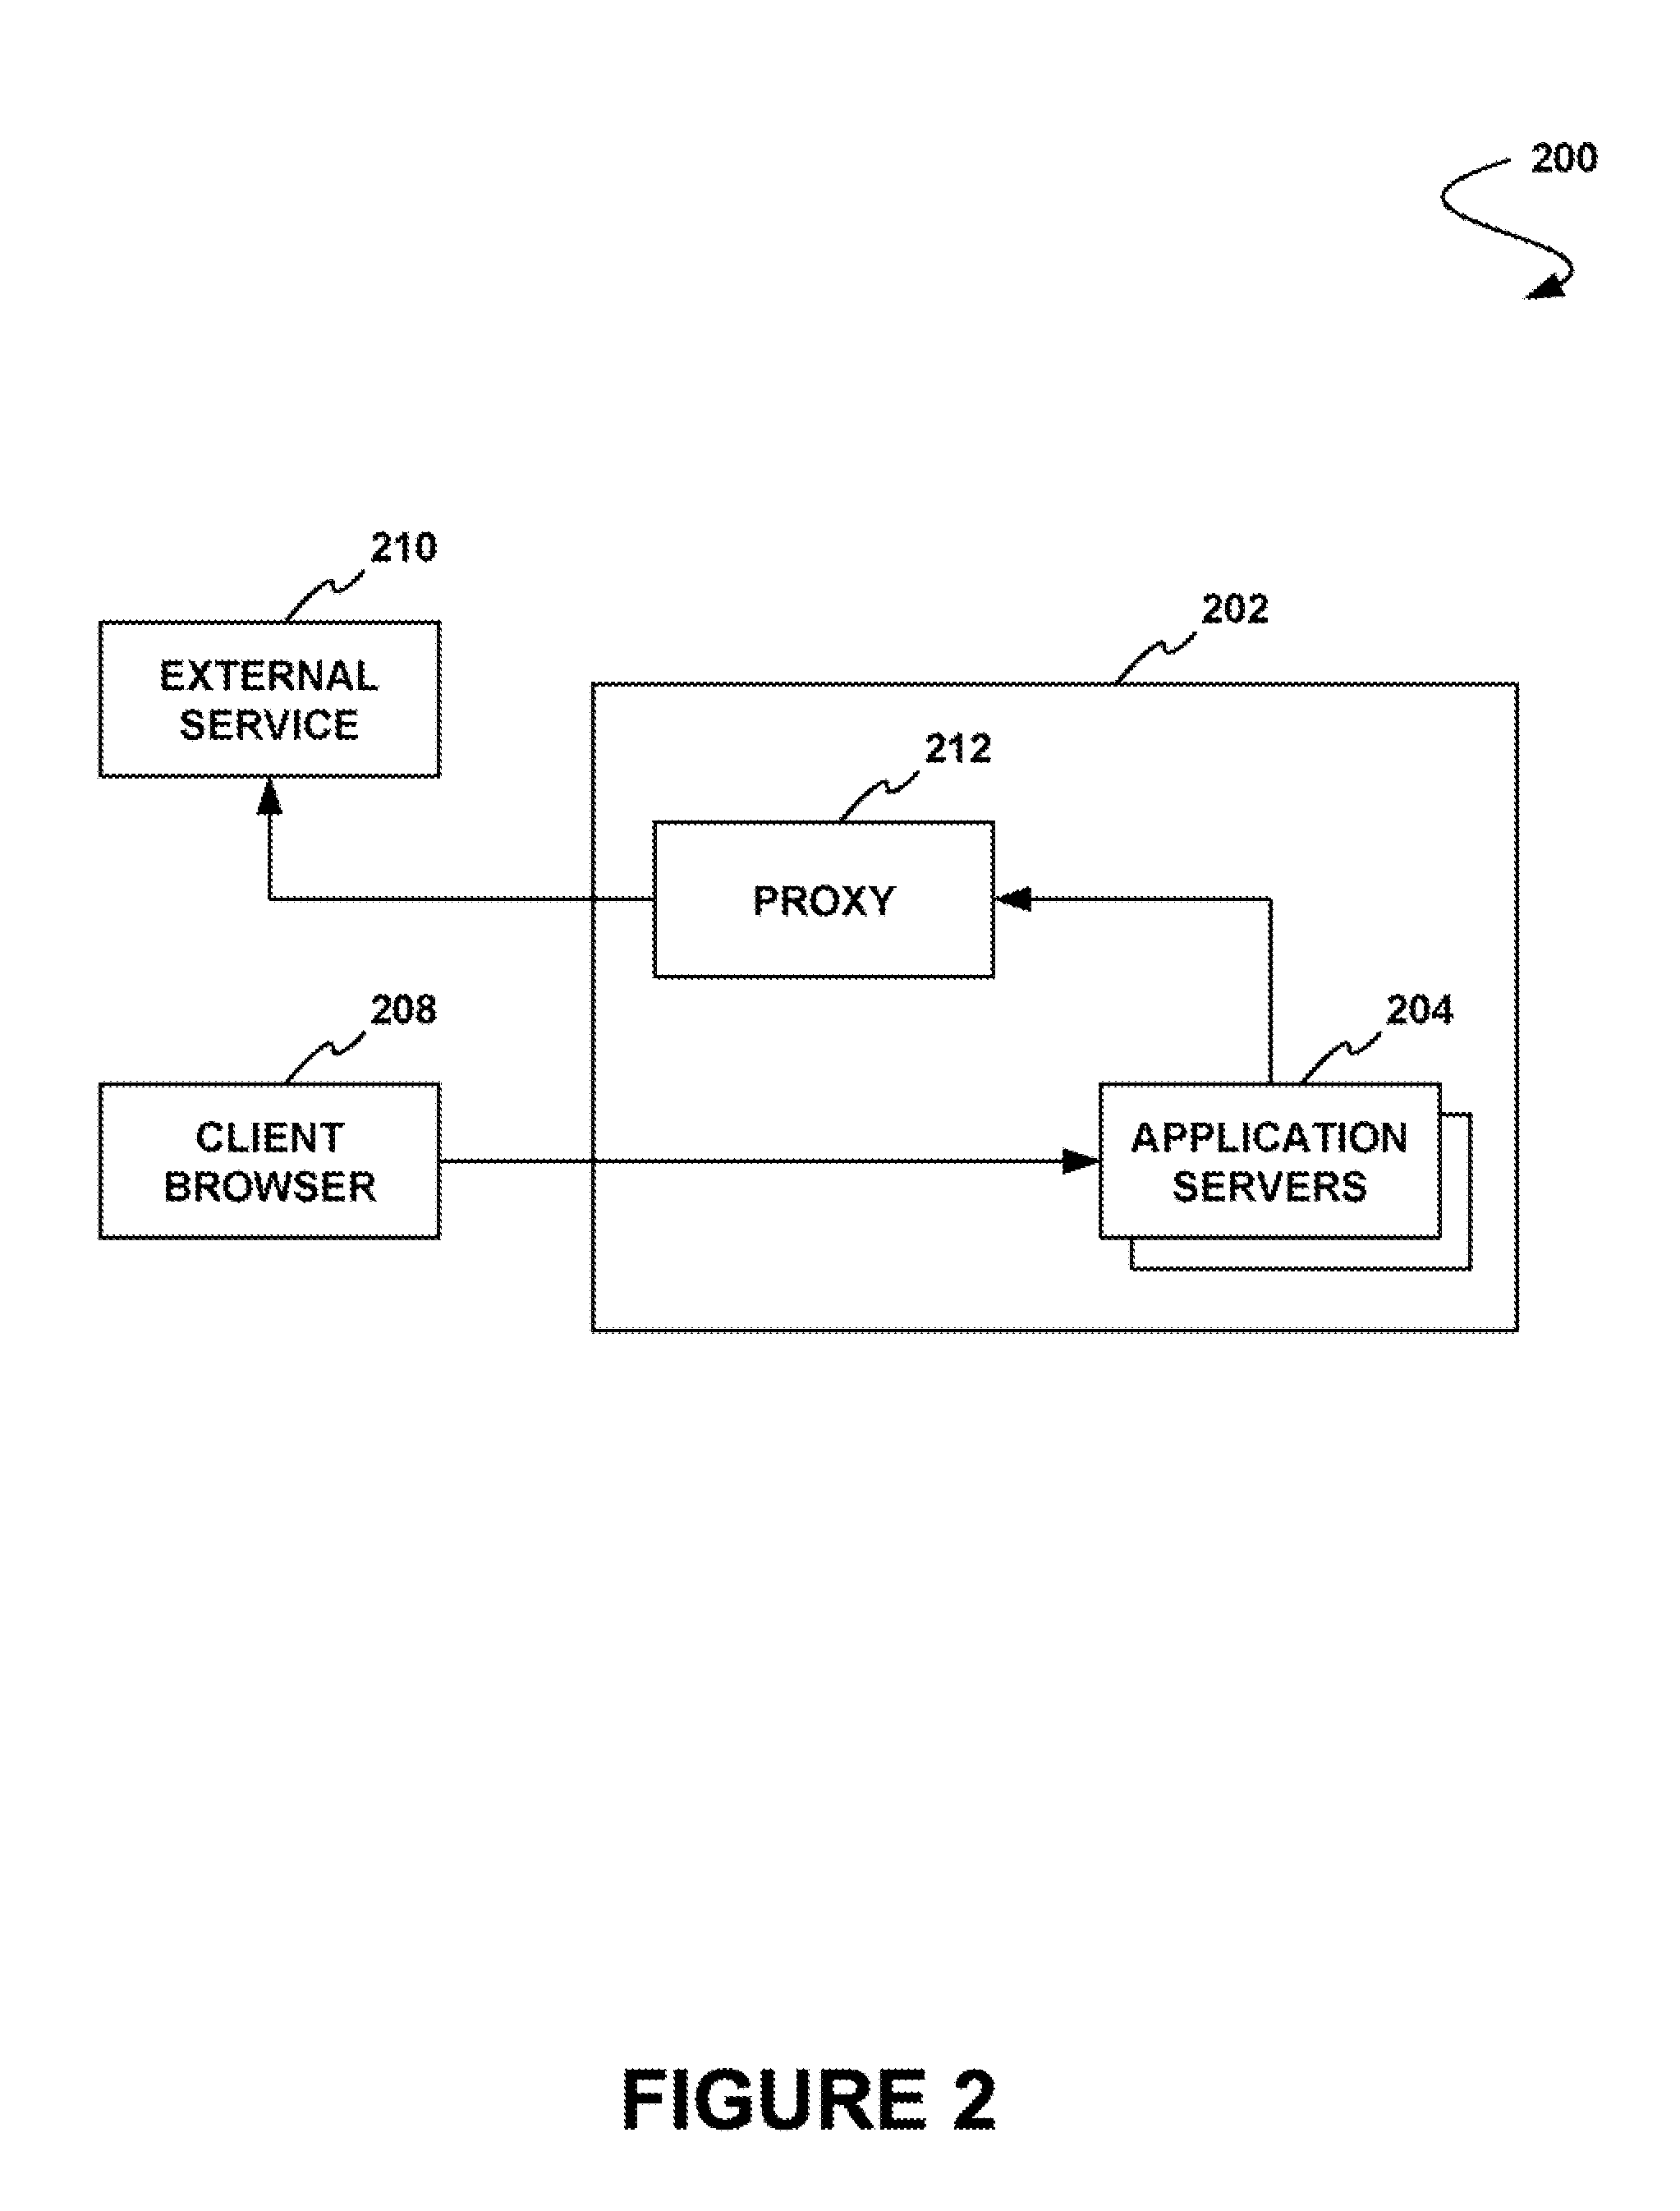 Method and system for providing a client access to an external service via an application services platform